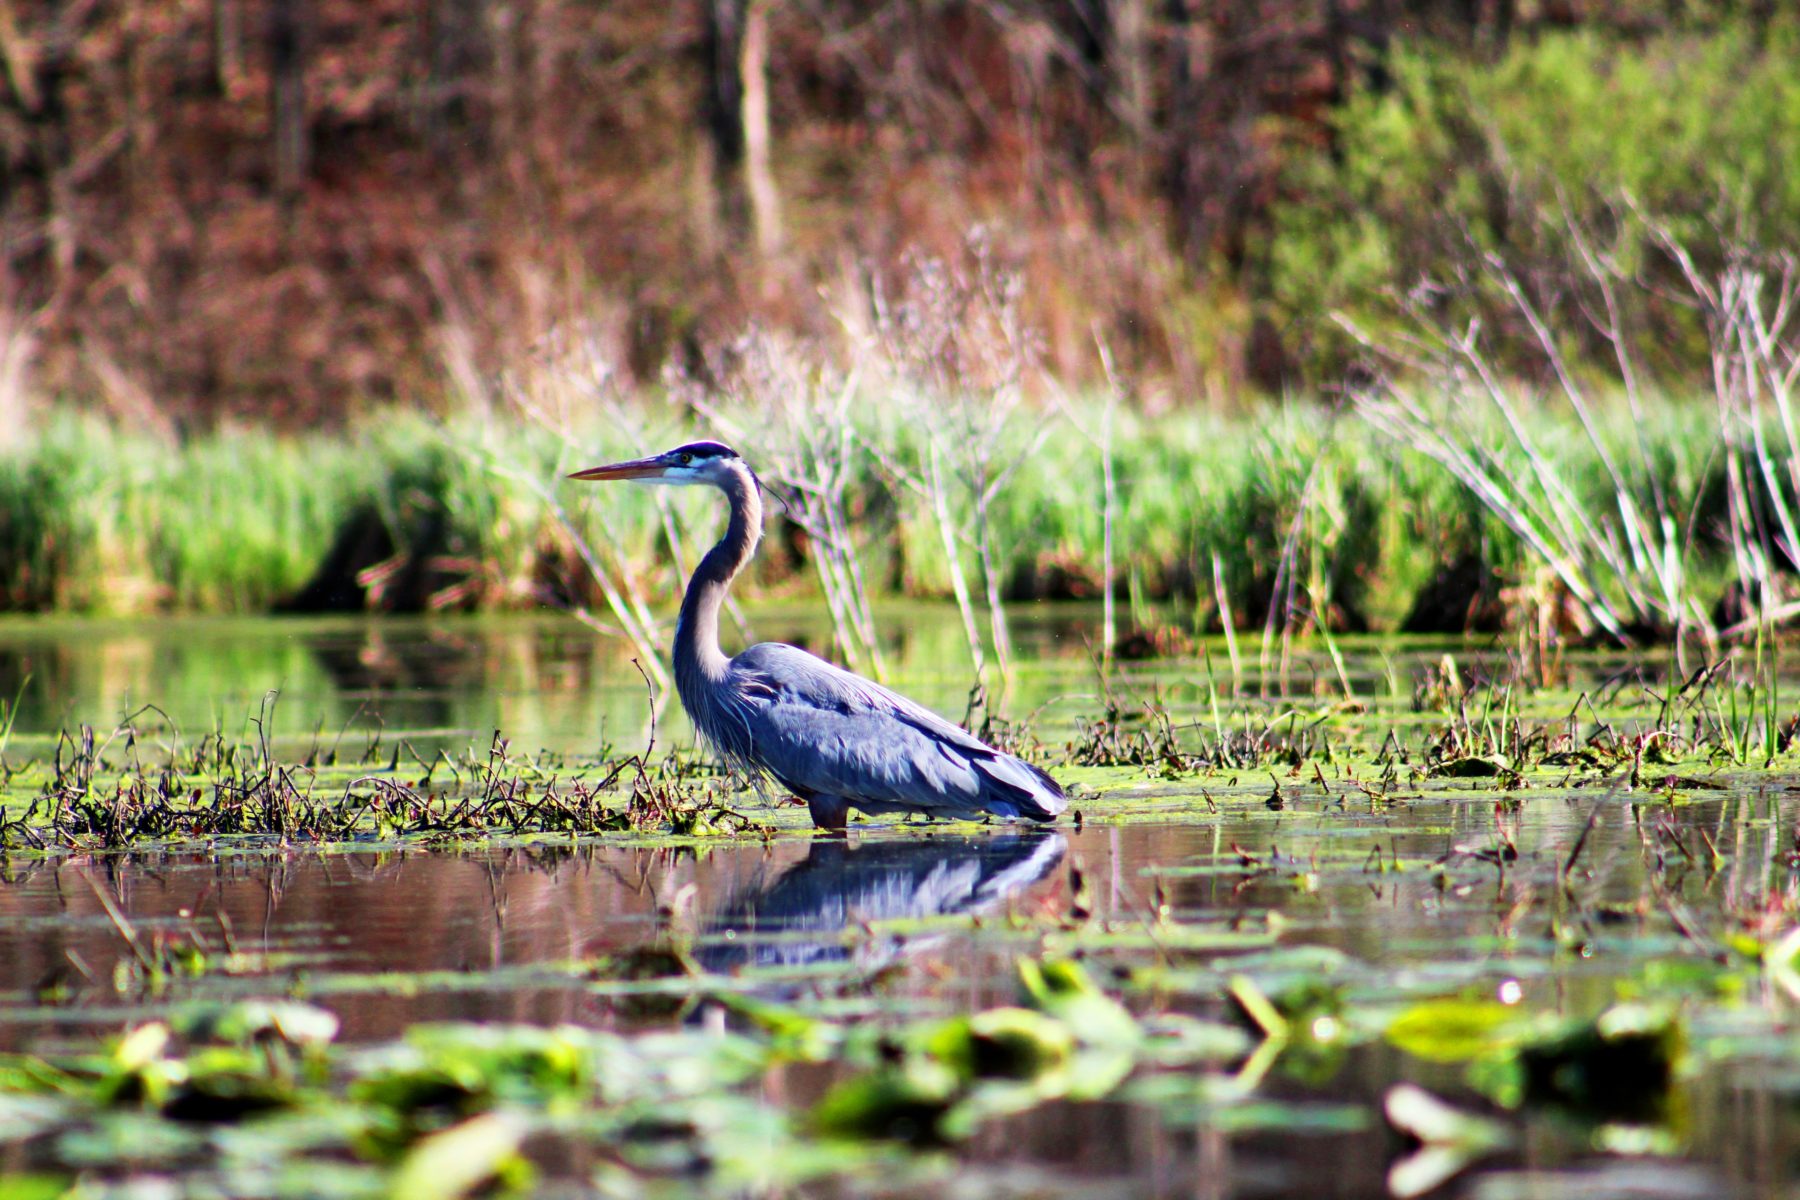 A Great Blue Heron walking through a wetland with green flora around it.